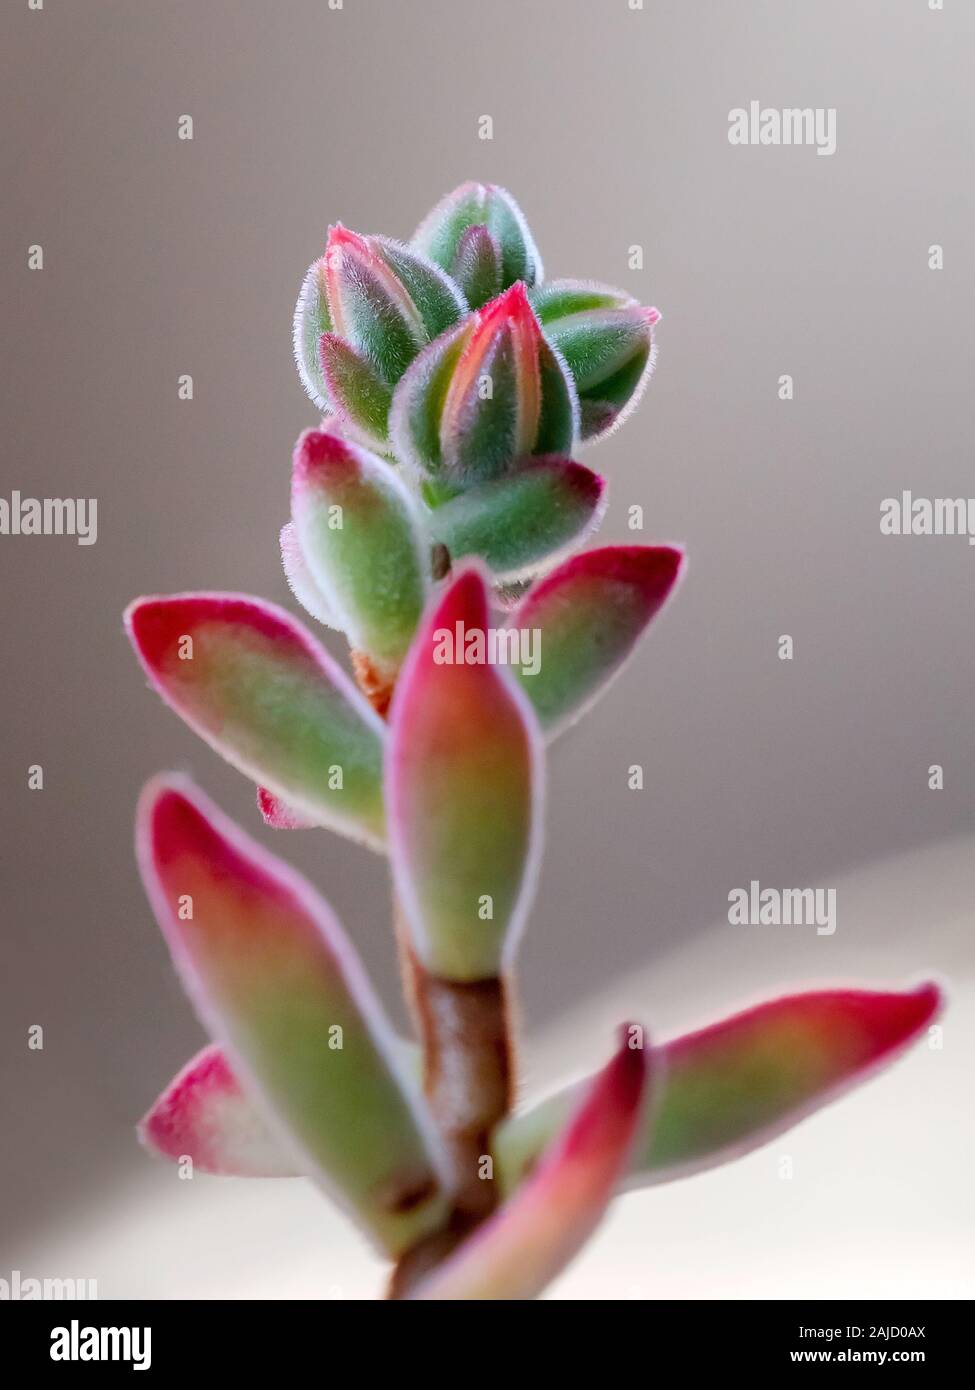 Branch of succulent plant of the genus Crassula, with red bud. Thick, fleshy and hairy succulent leaves. Stock Photo